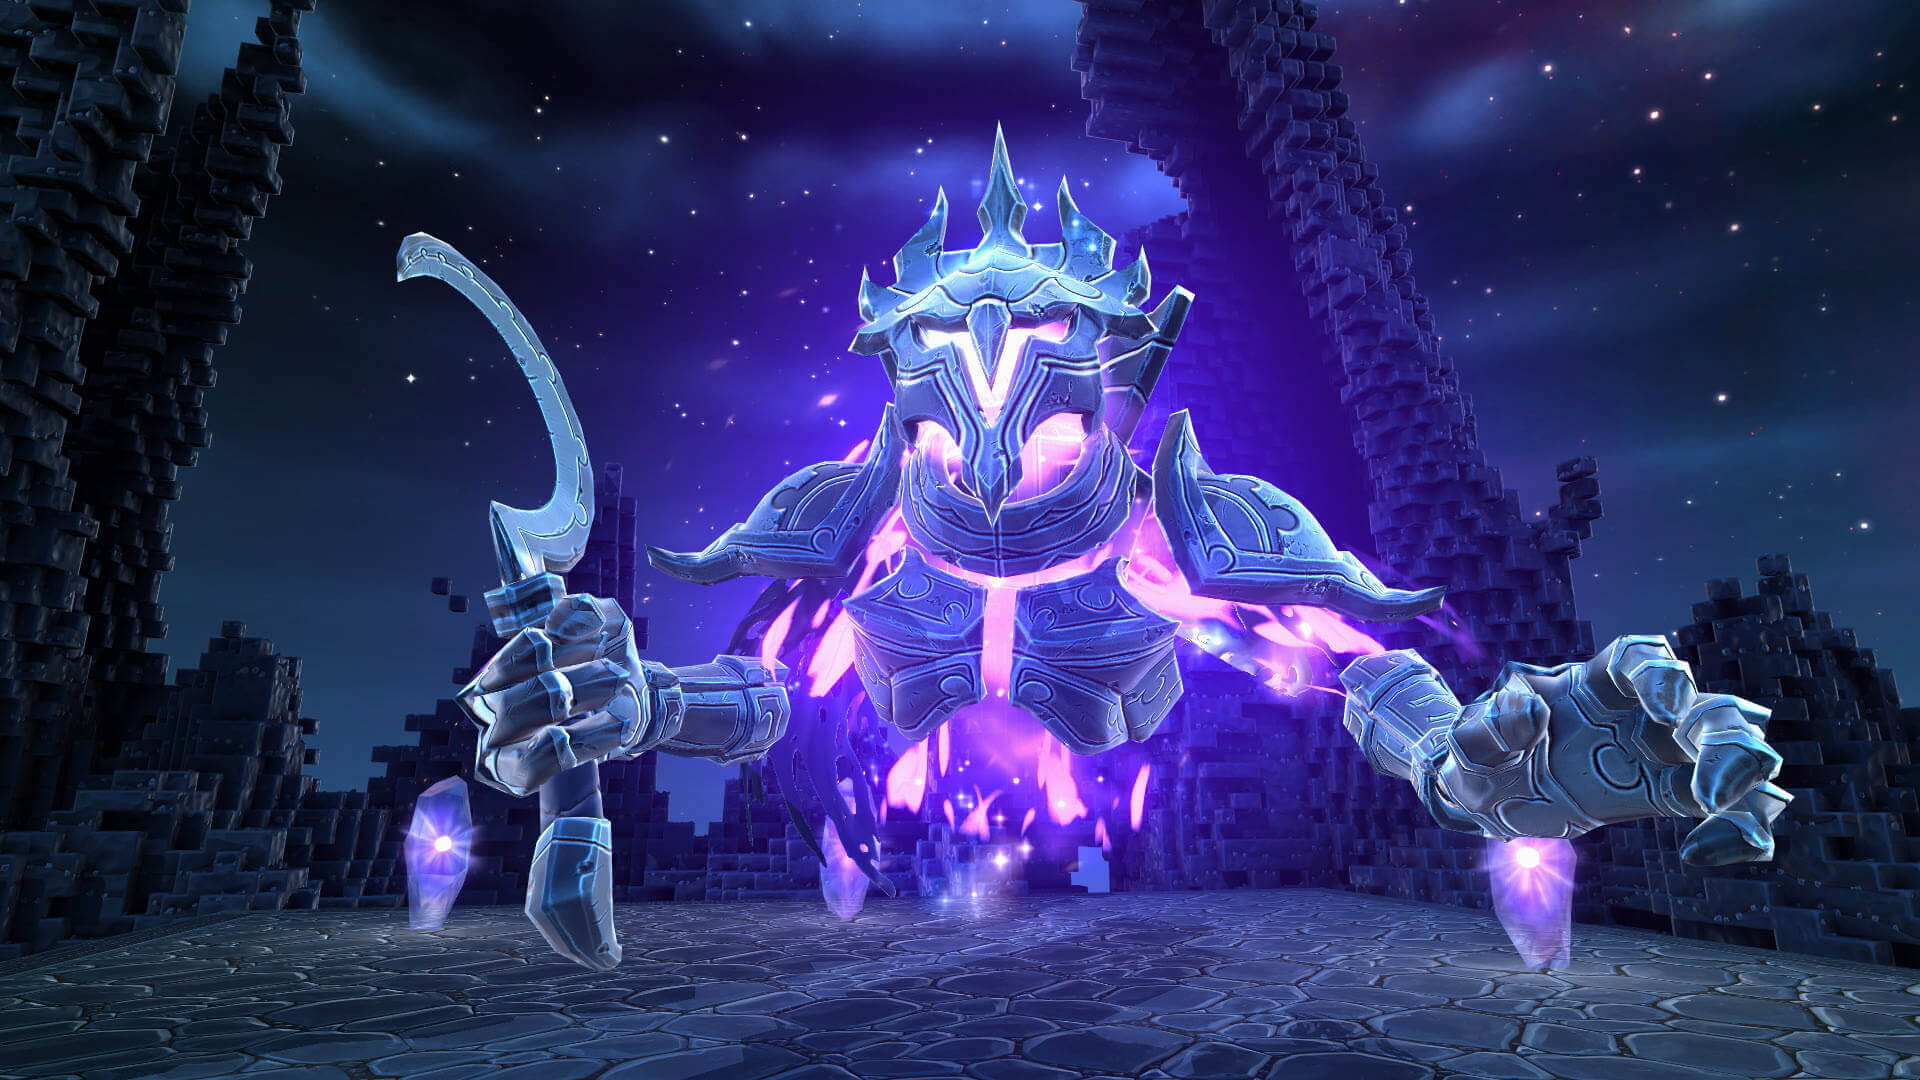 Portal Knights Screenshot sowing a large purple glowing characer